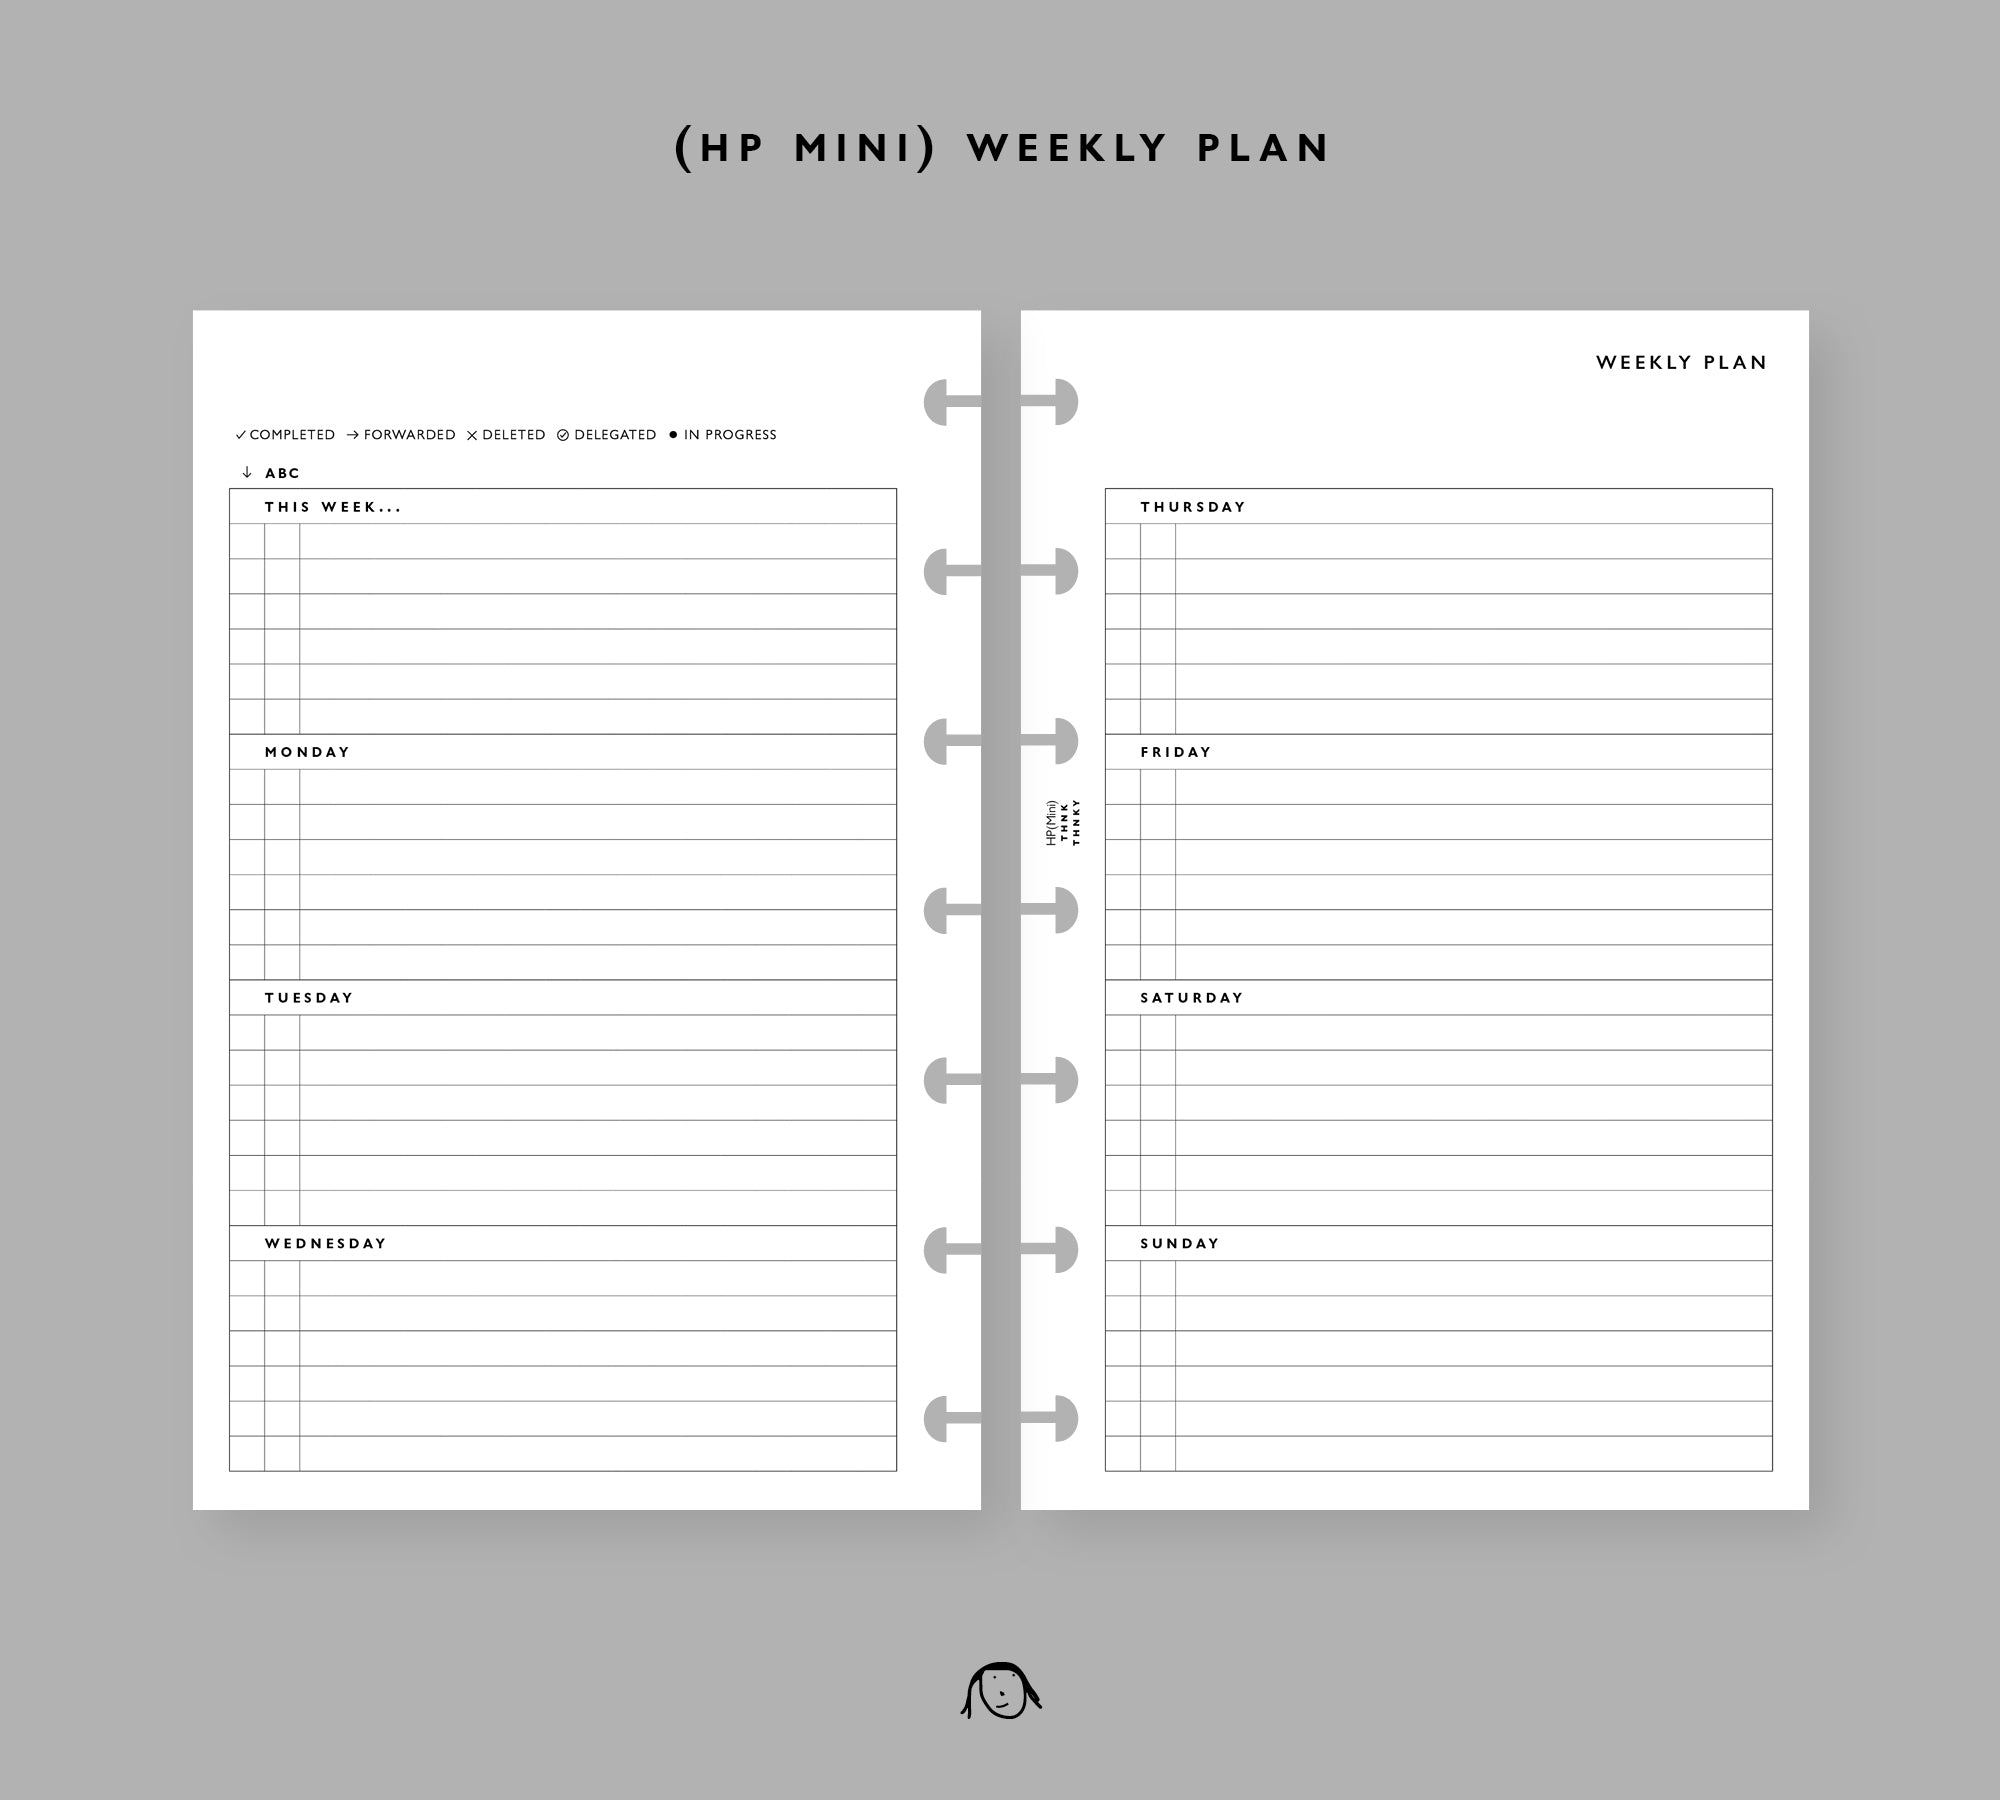 W1: Weekly